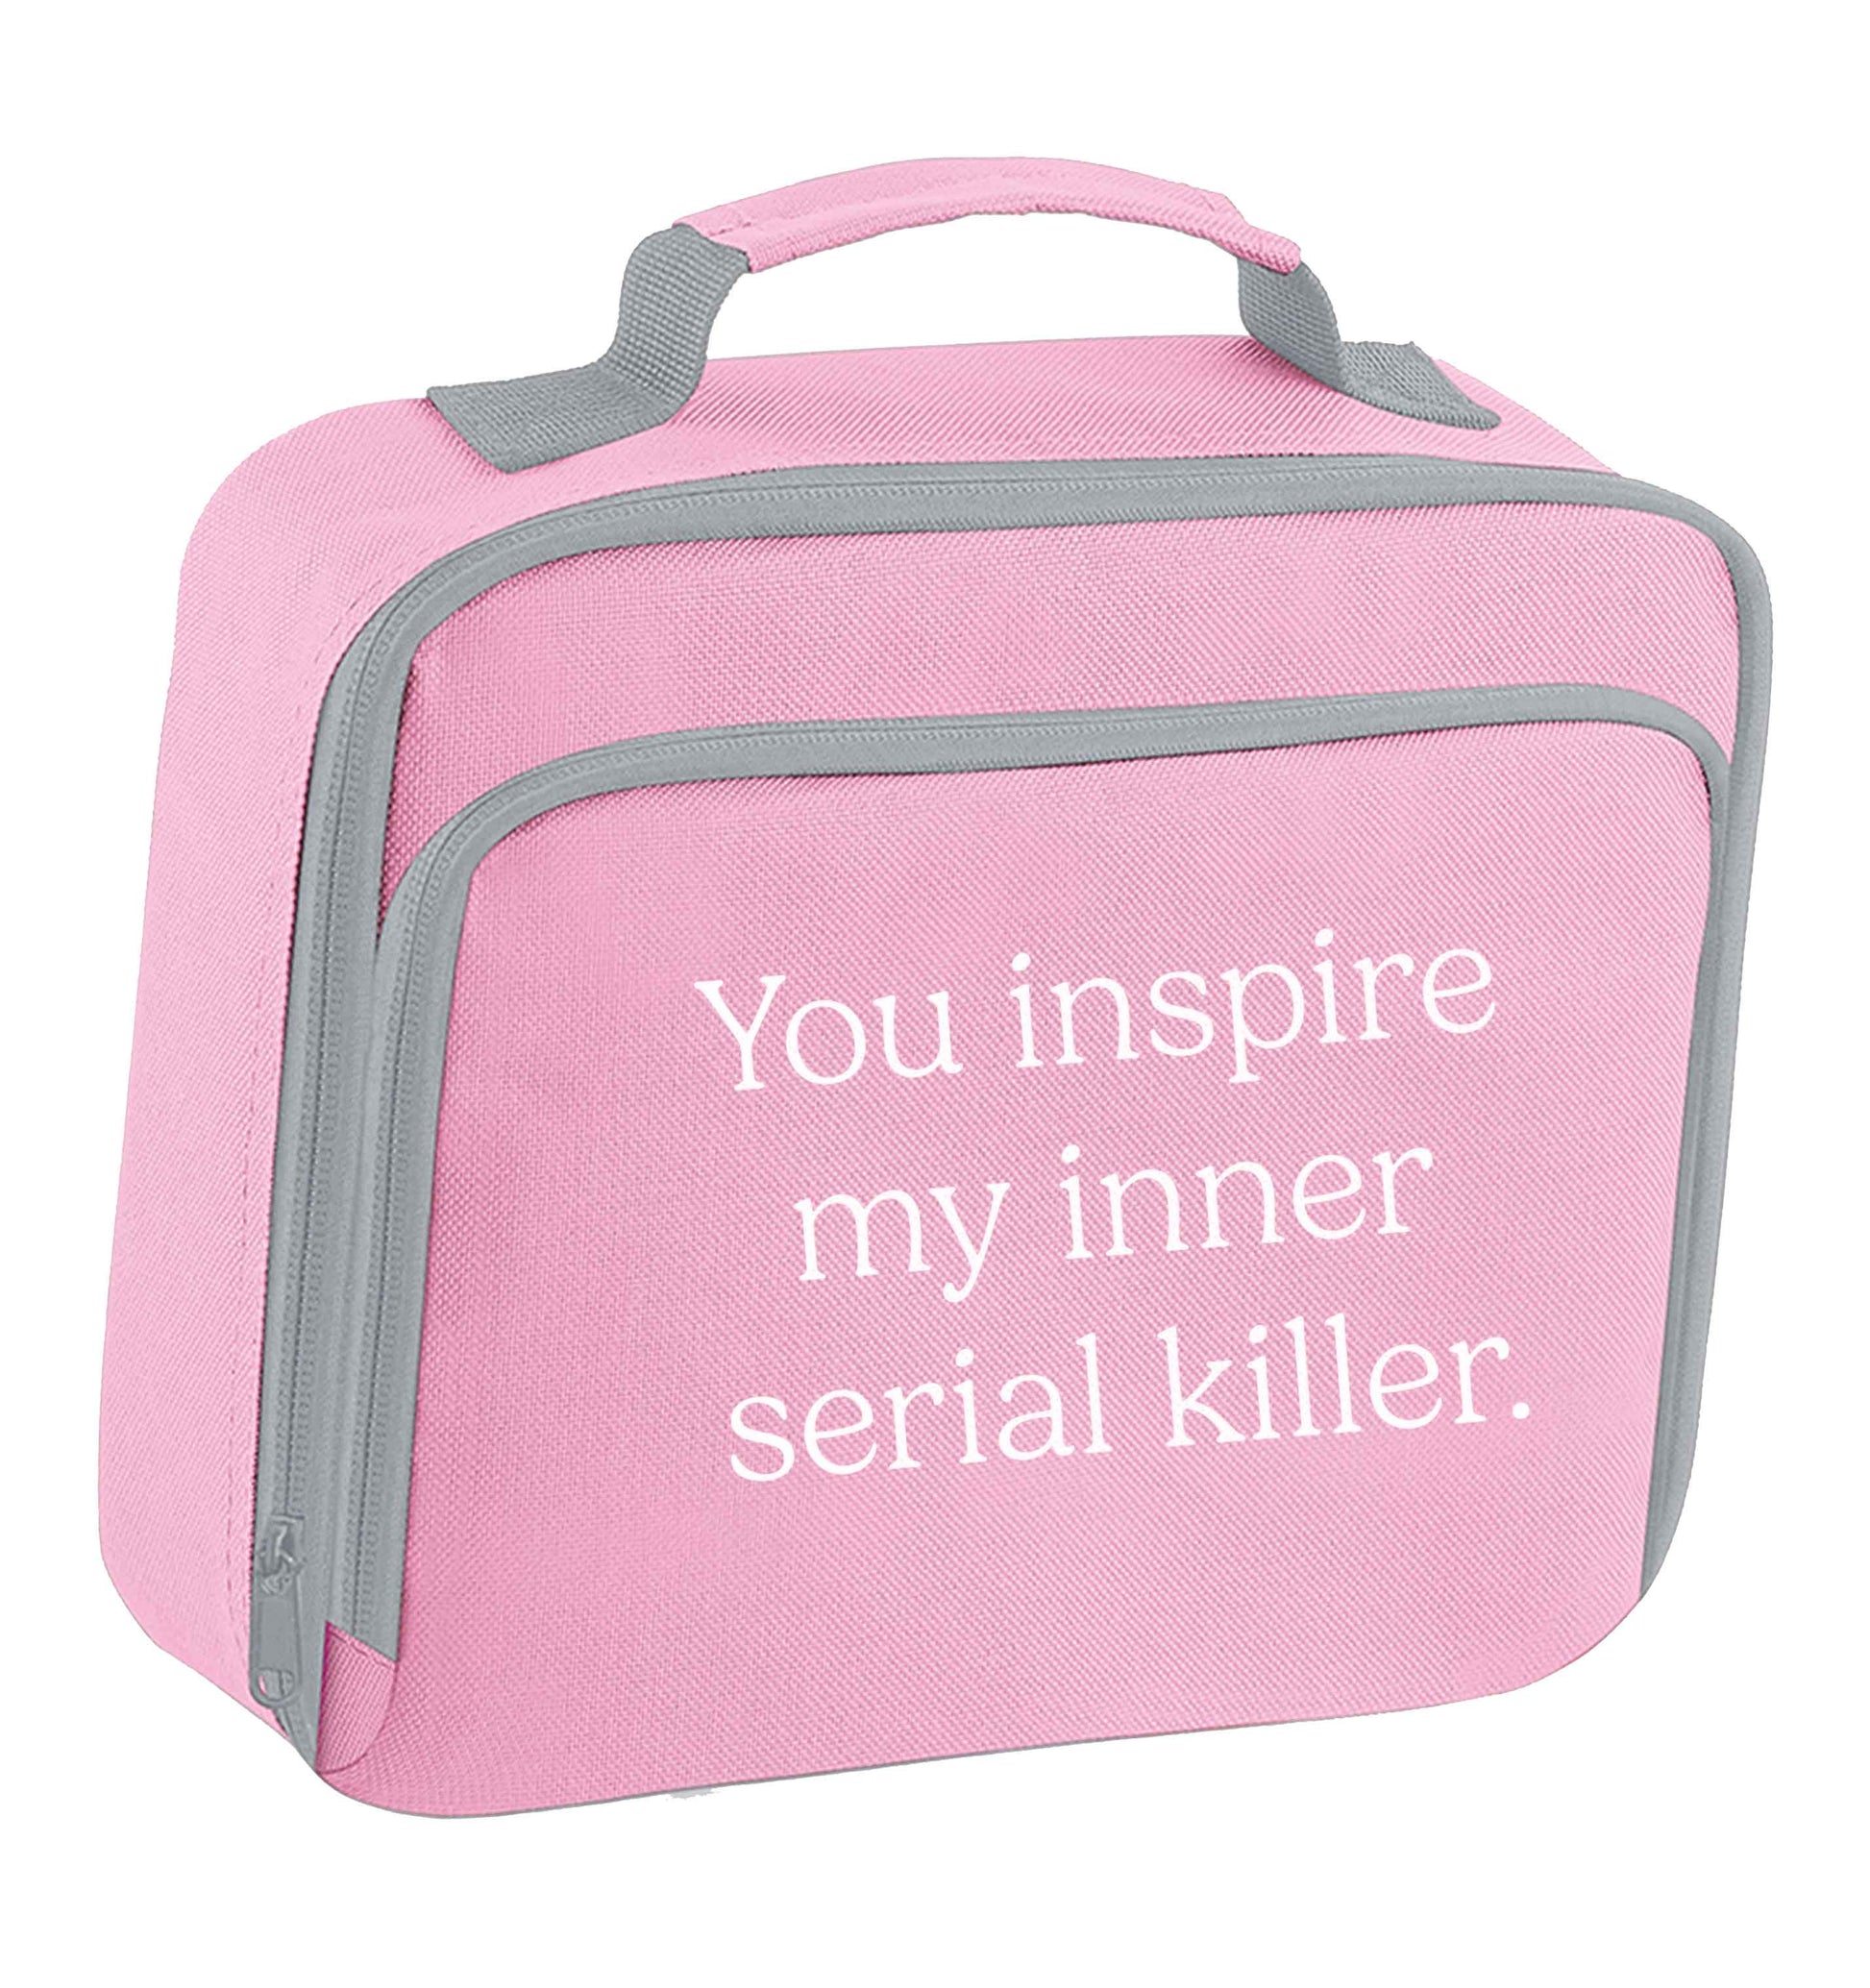 You inspire my inner serial killer Kit insulated pink lunch bag cooler